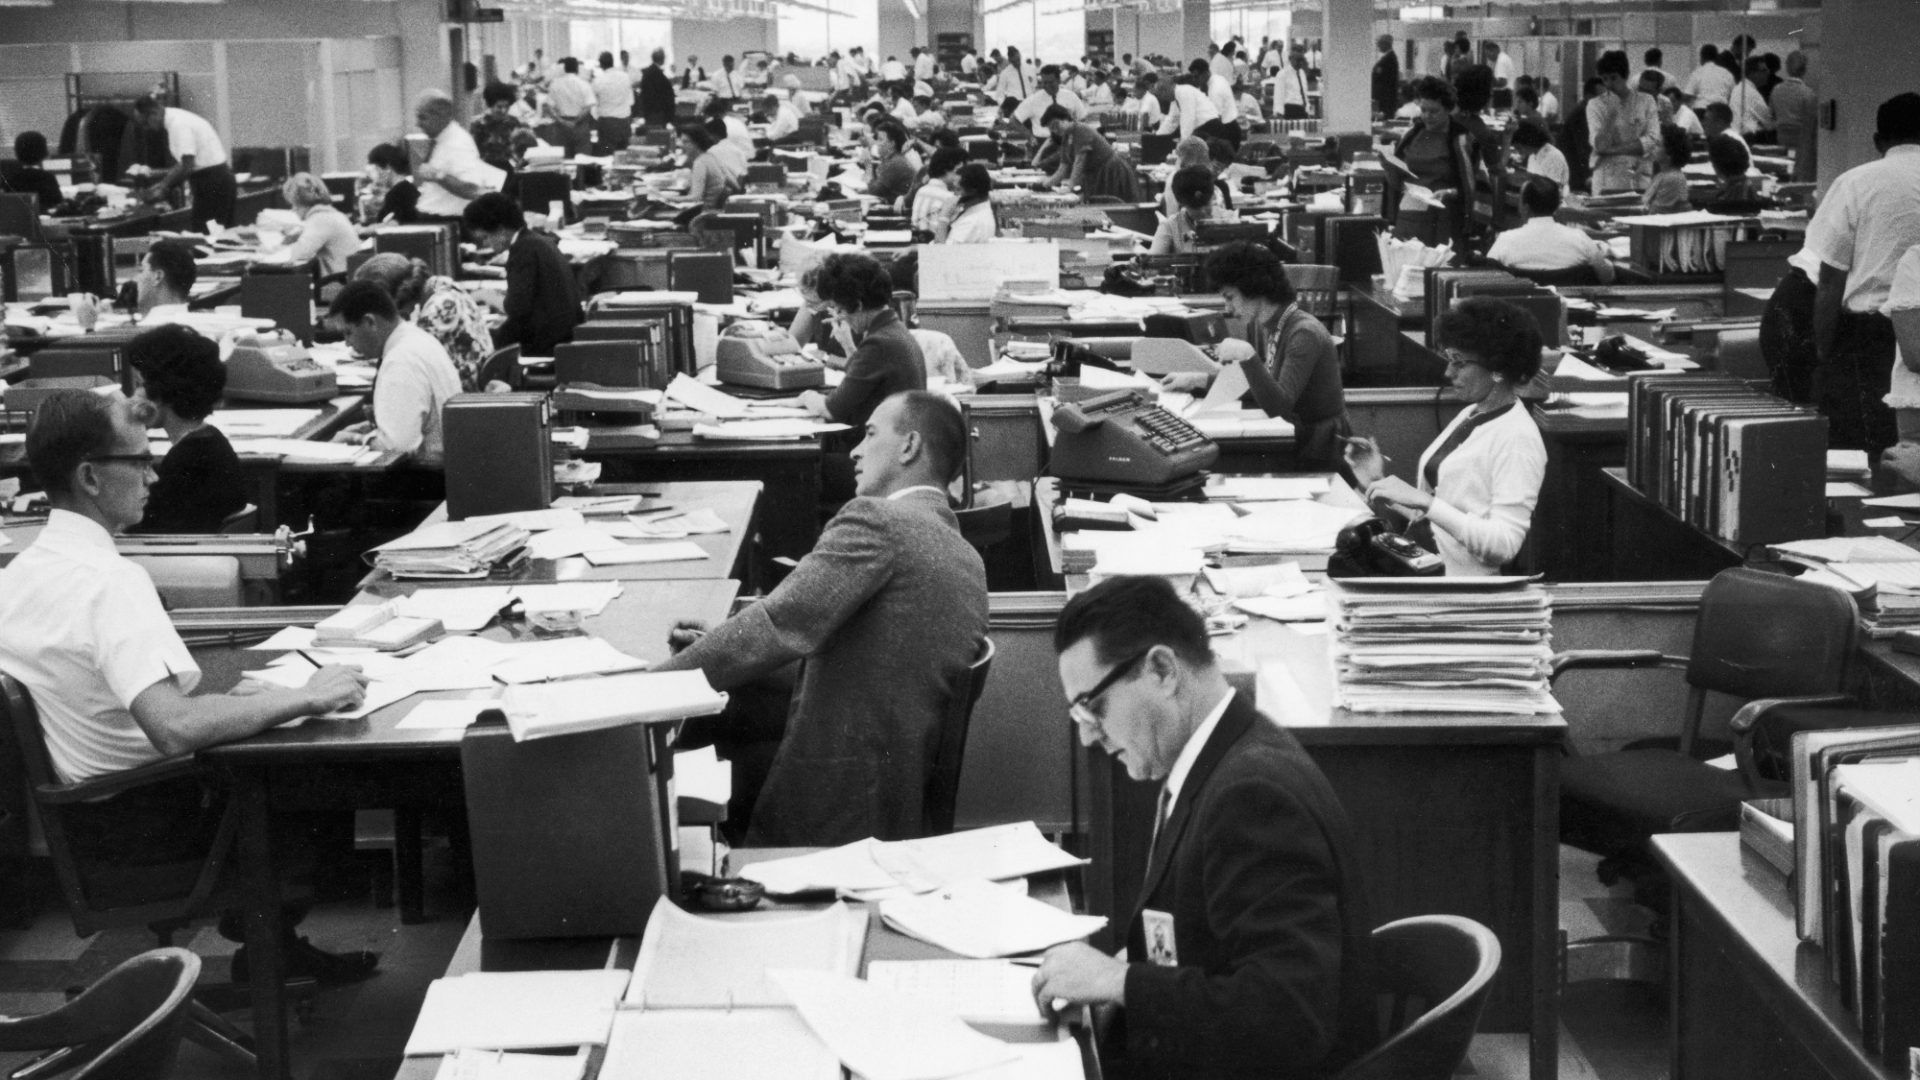 A huge open-plan office at Rocketdyne, a division of North American Aviation, in California, 1963. Photo: Hulton Archive/Getty